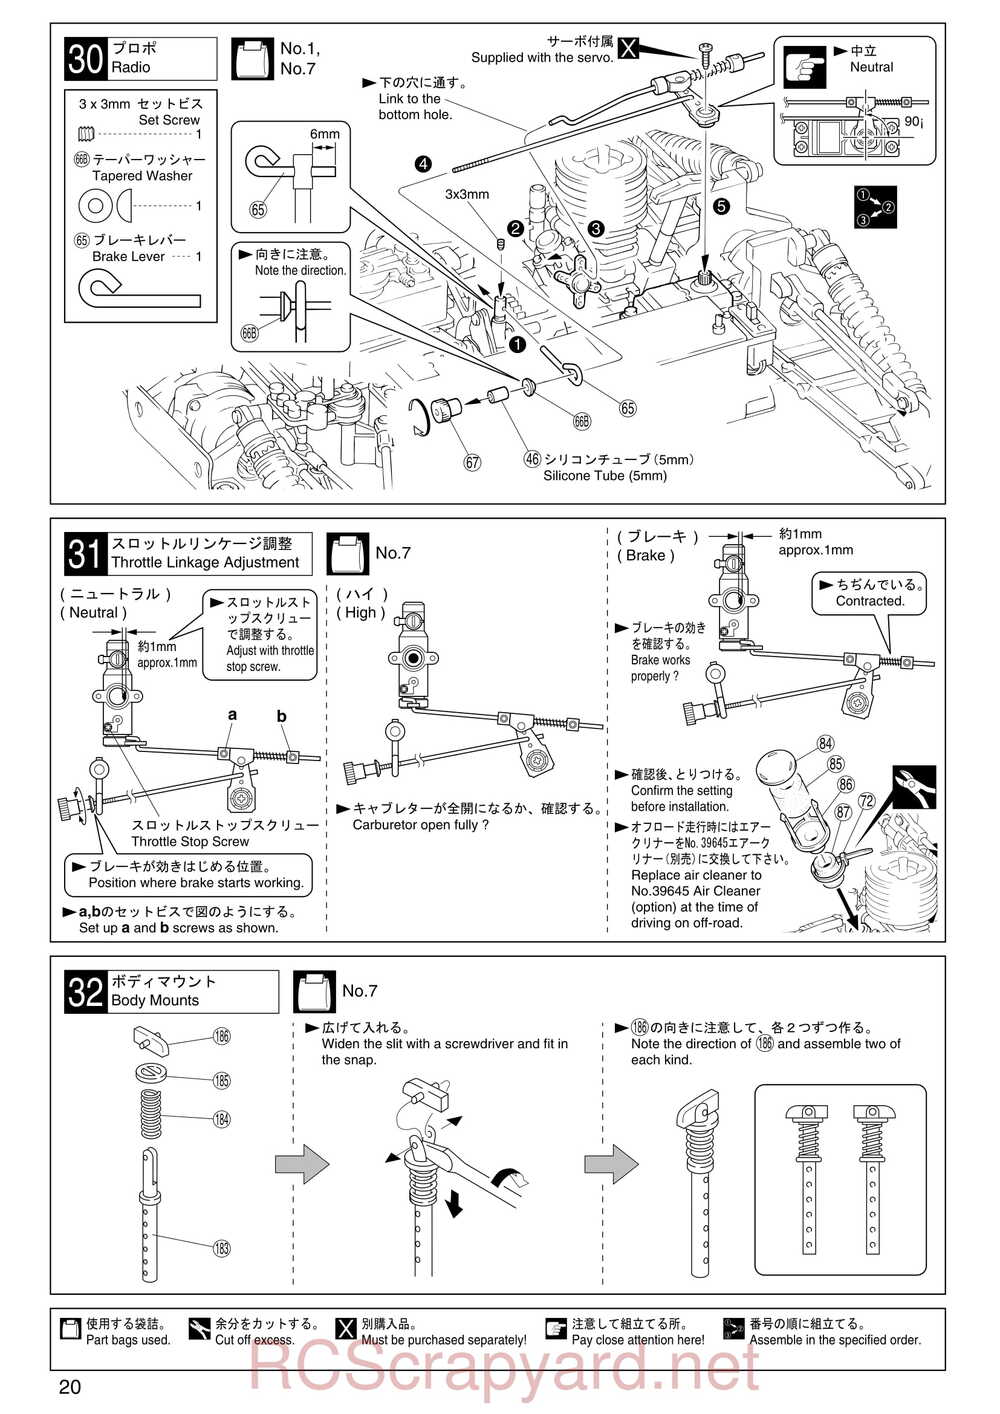 Kyosho - 31213 - TR-15 Monster-Touring - Manual - Page 20